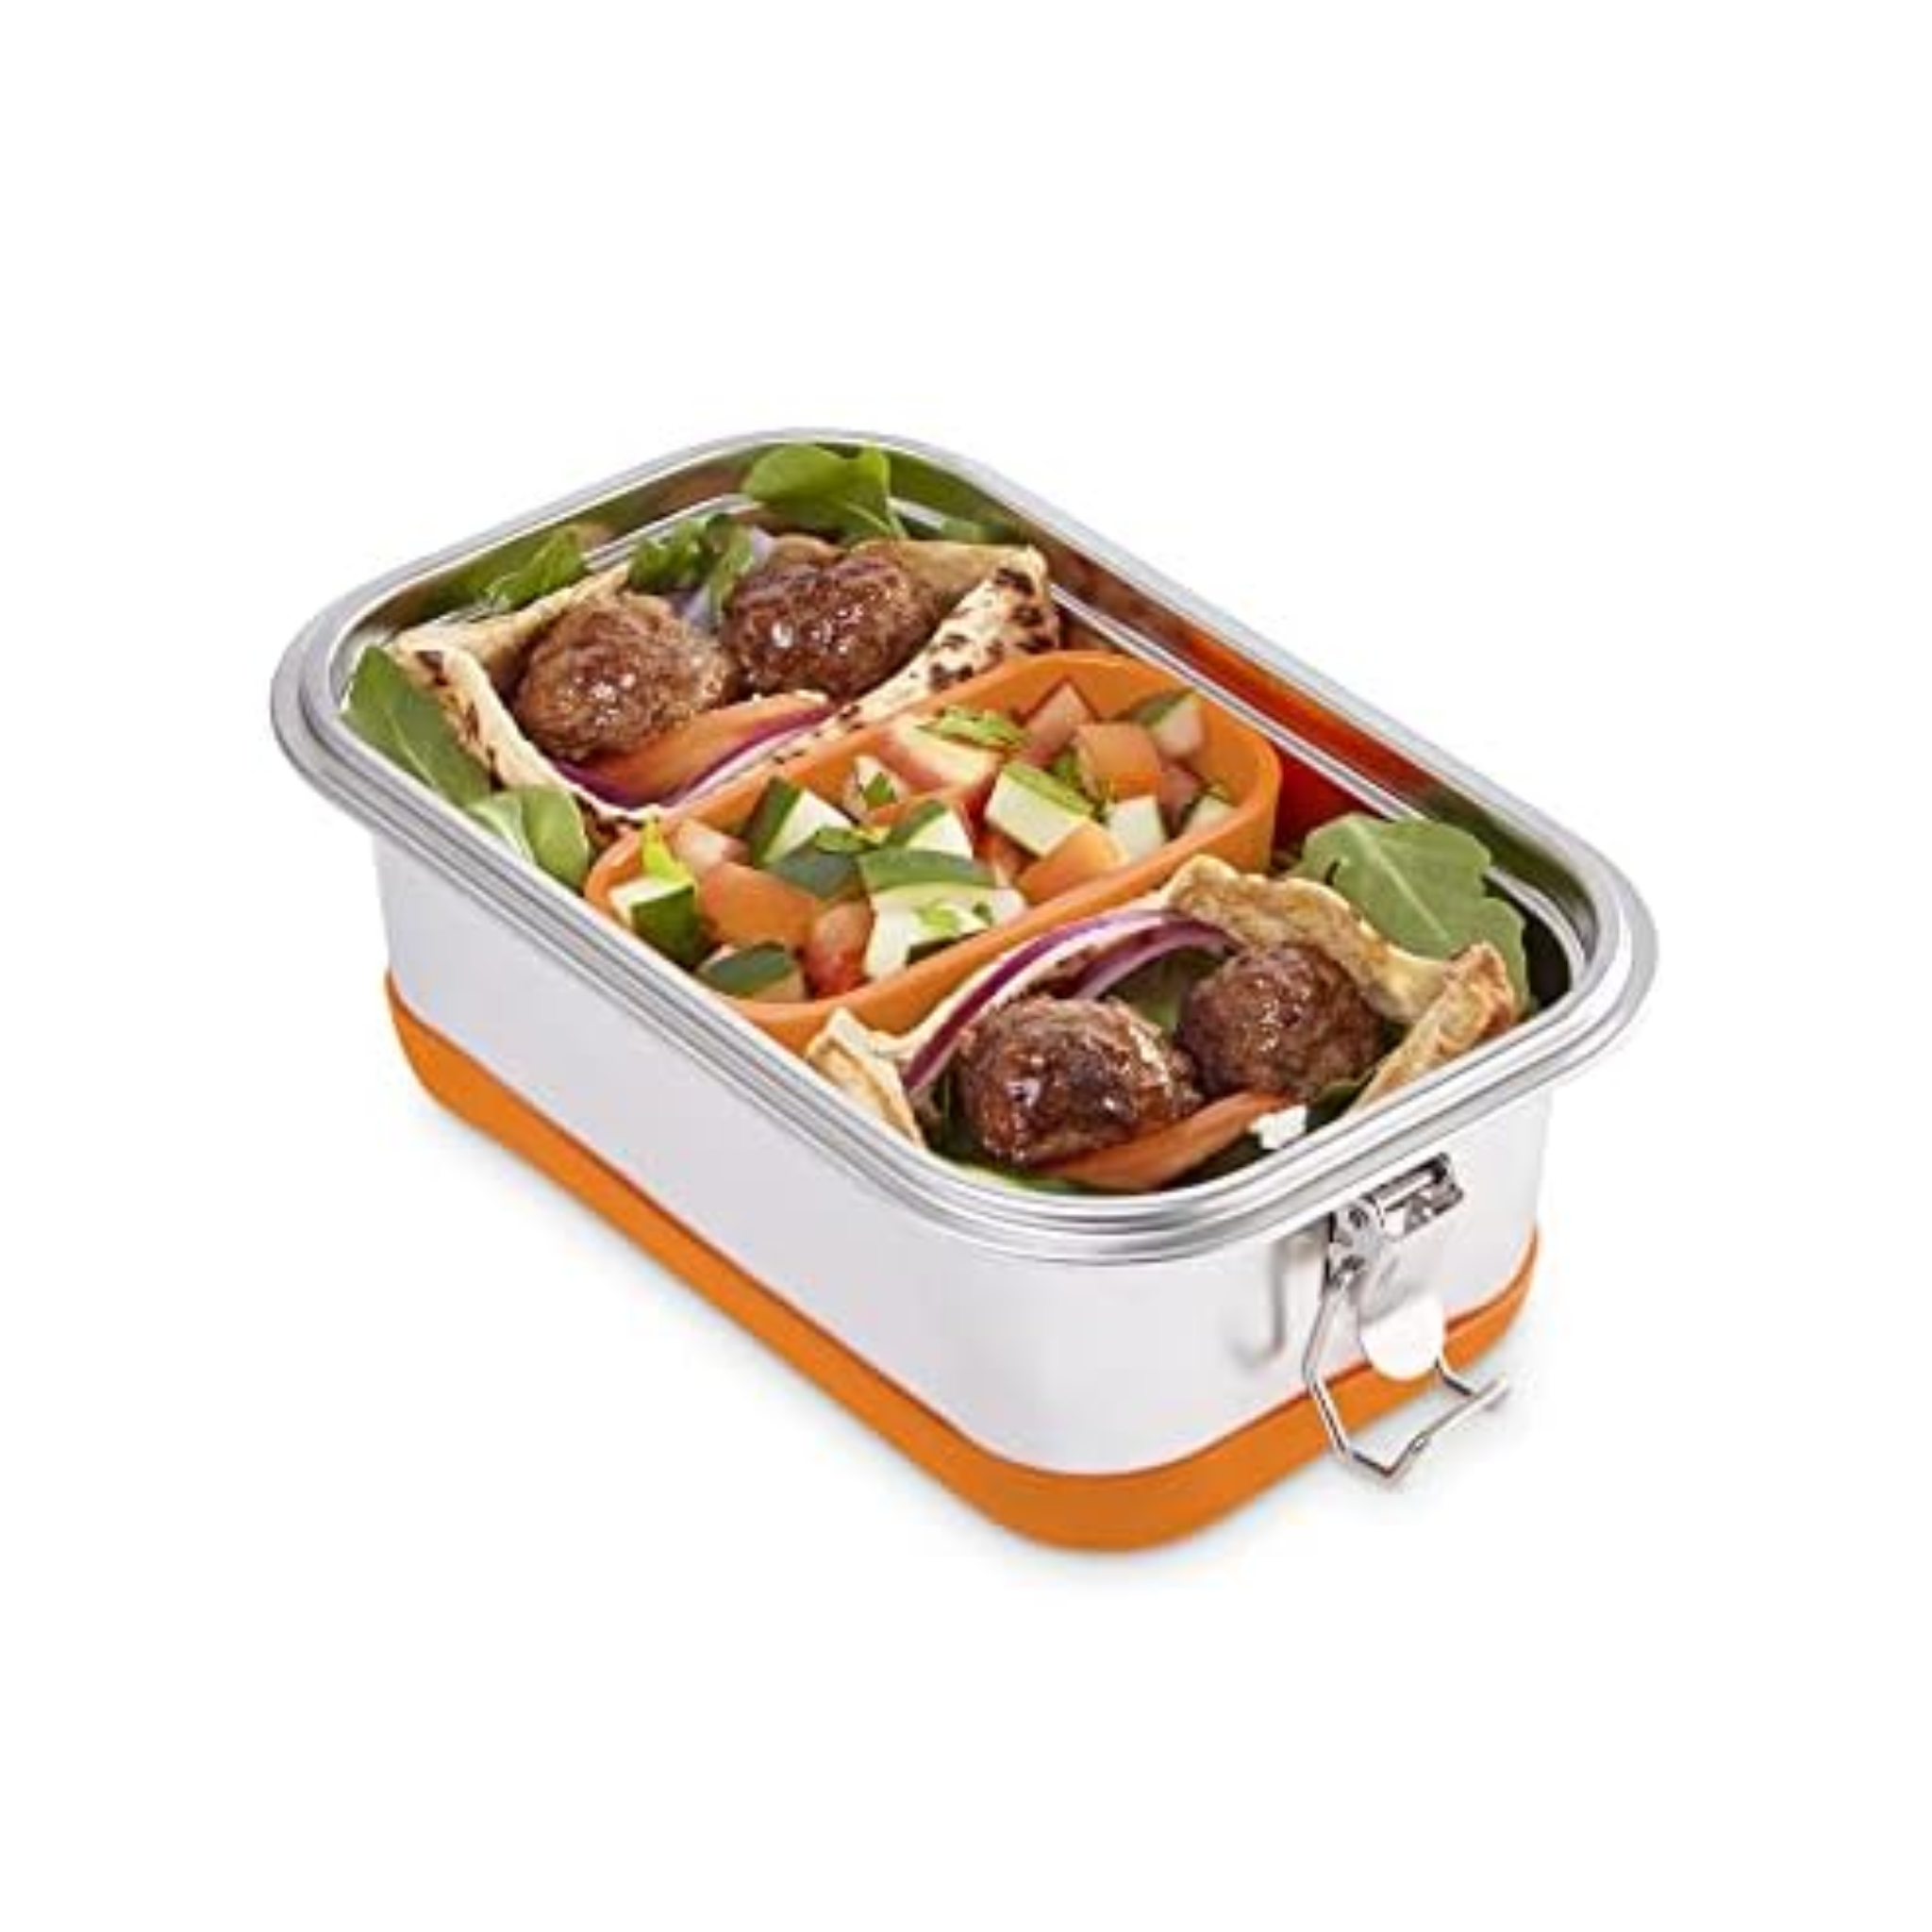 Dash The Fit Cook x Stainless Steel Lunch Box